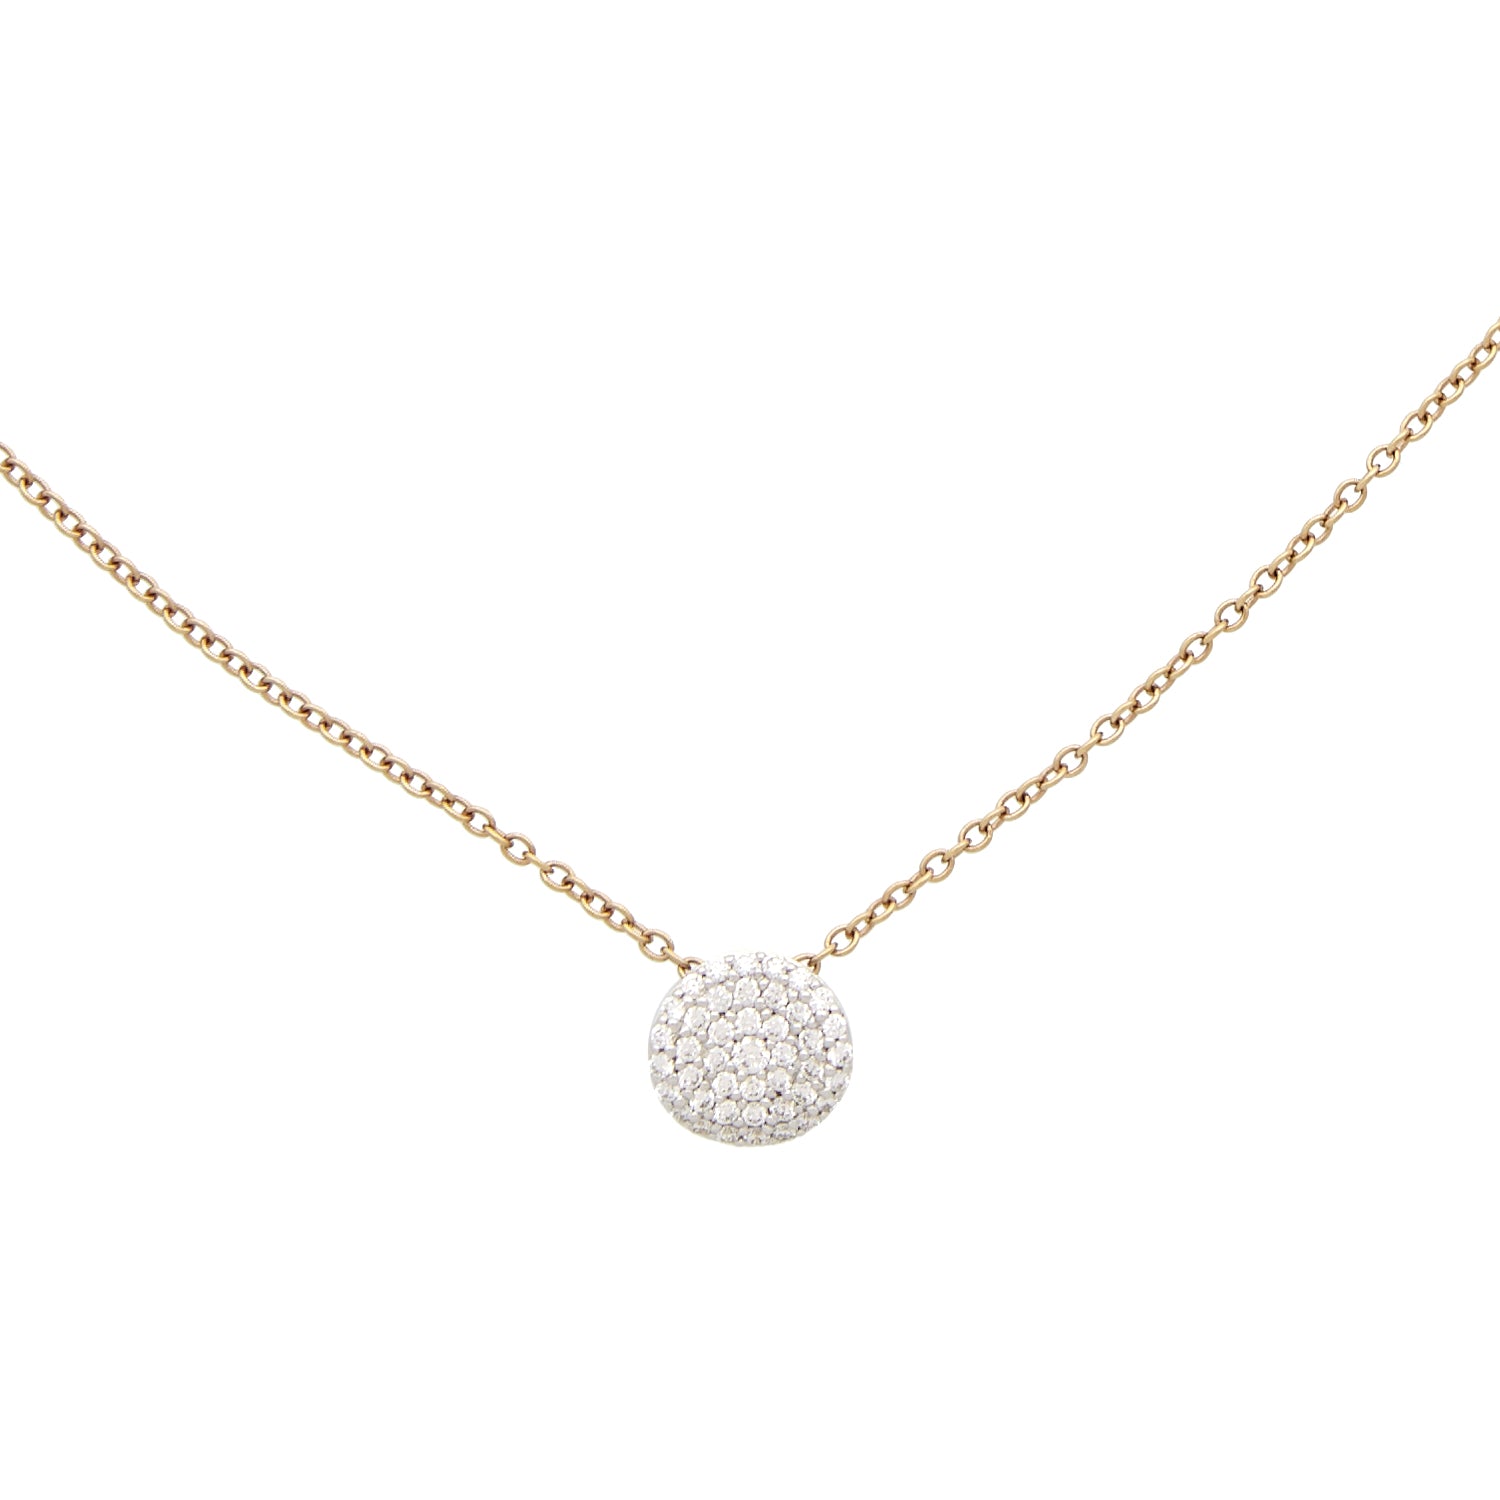 Rose gold necklace with diamond.